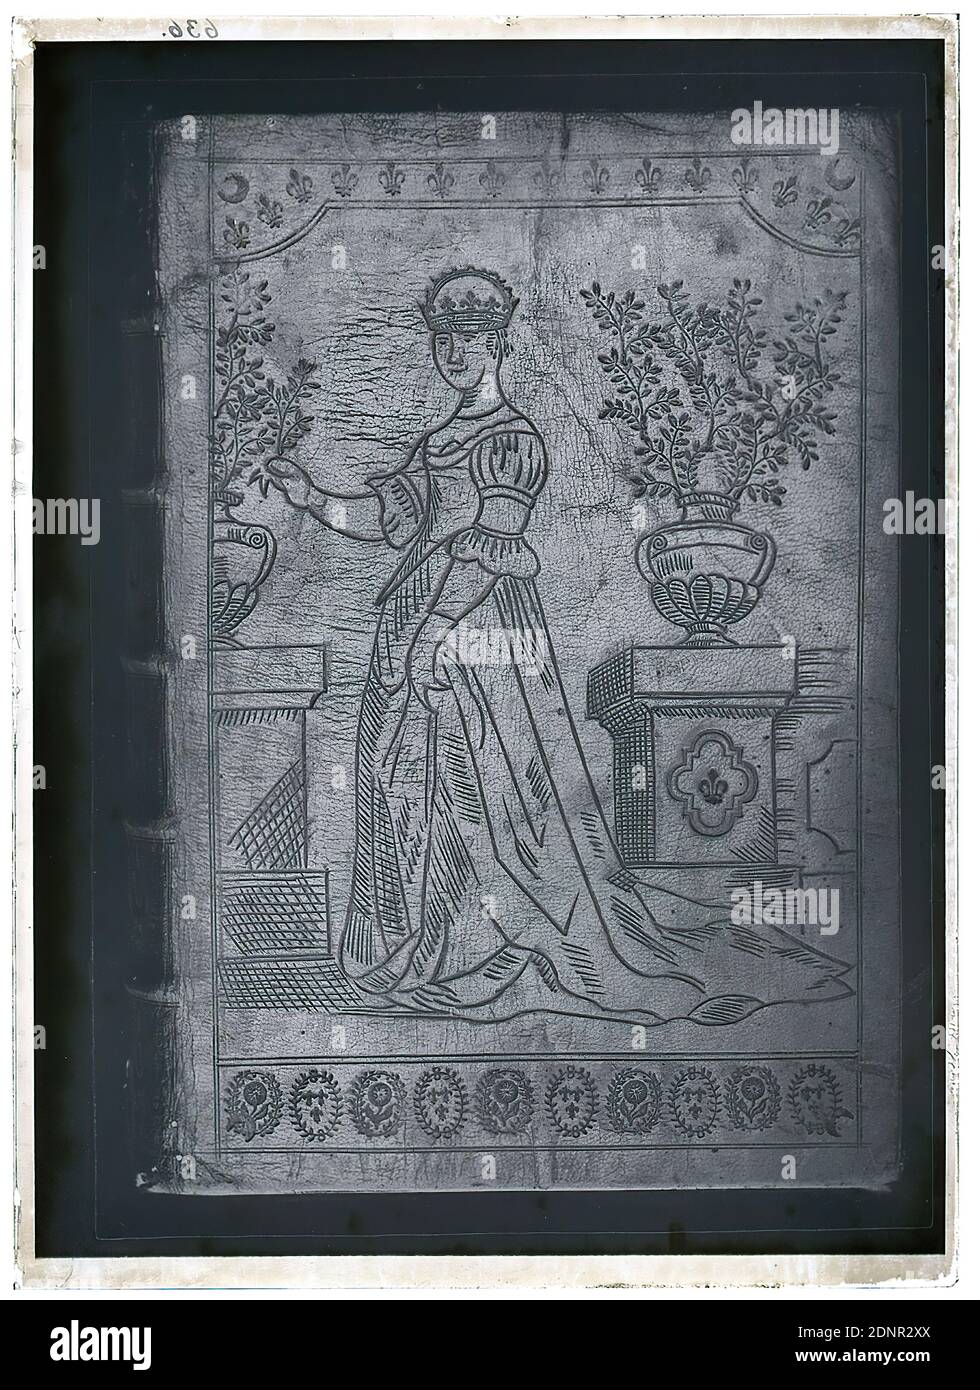 Wilhelm Weimar, book cover, glass negative, black and white negative process, total: height: 23.8 cm; width: 17.8 cm, numbered: top left. : in black ink: 636, factual photography, arts and crafts, industrial design, book Stock Photo